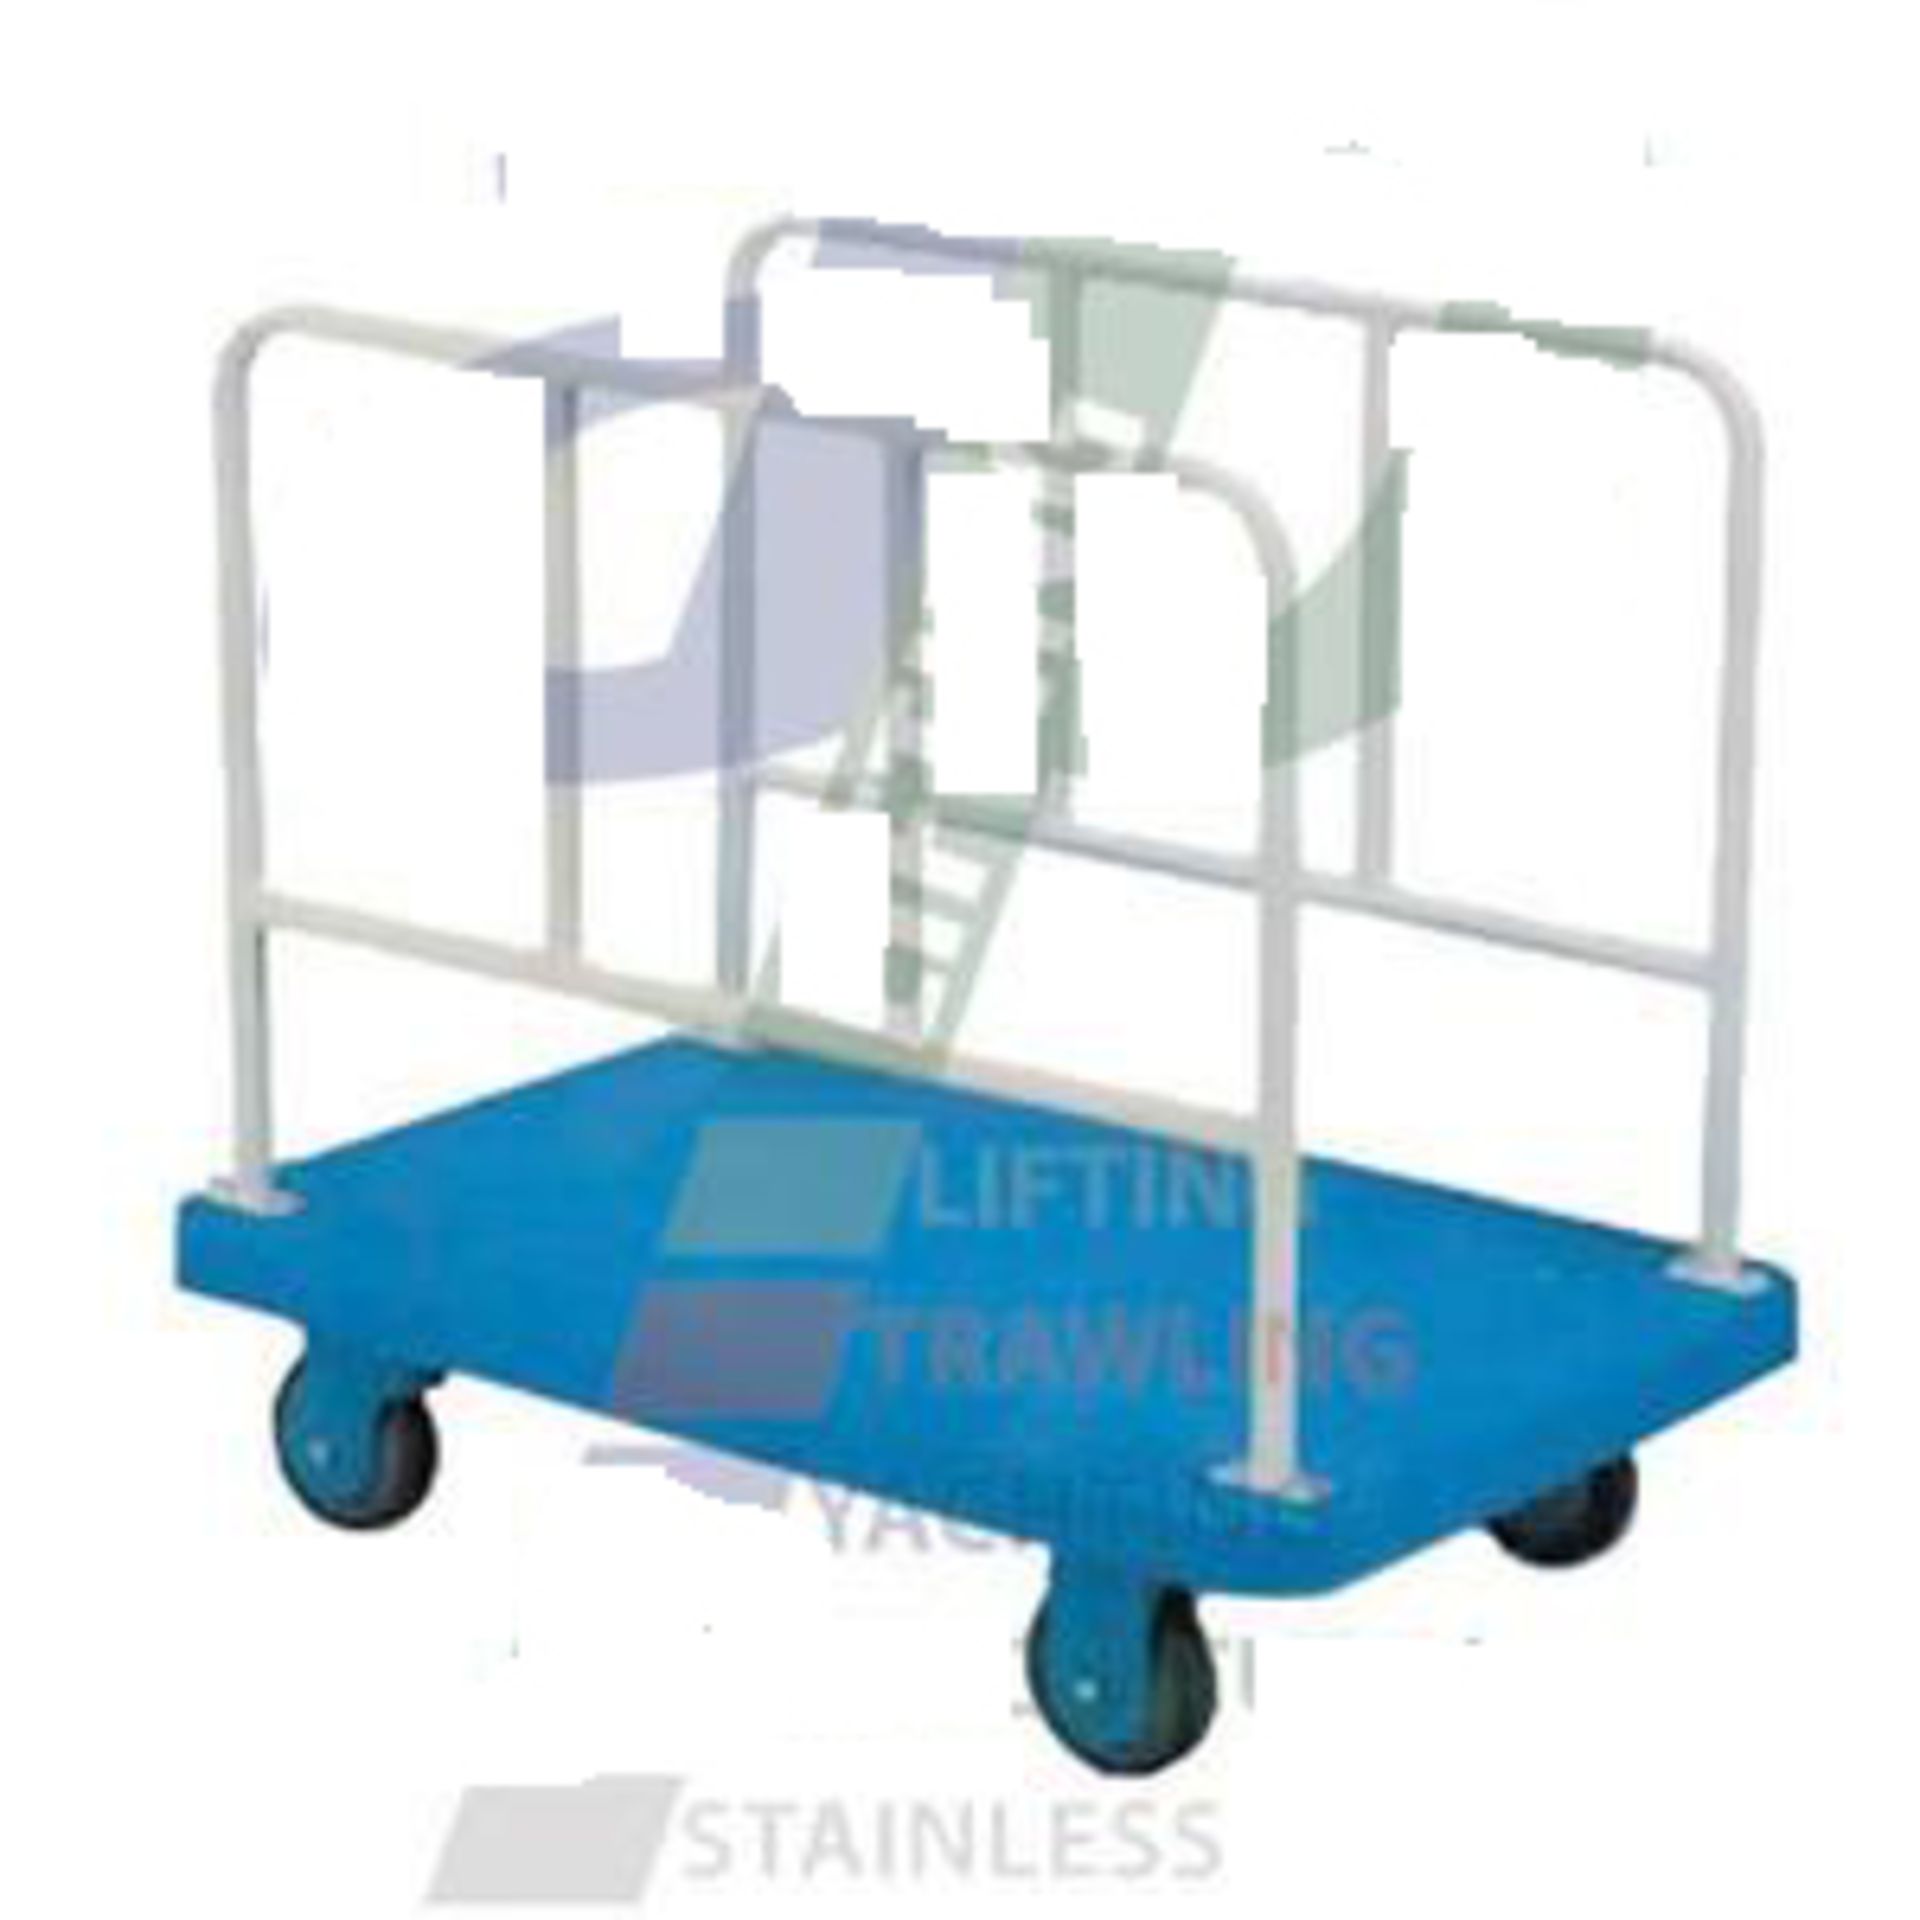 1 X 150KG PLATFORM TROLLEY (PZS150) - BRAND NEW
Built for long service.
 Ideal for office, school,